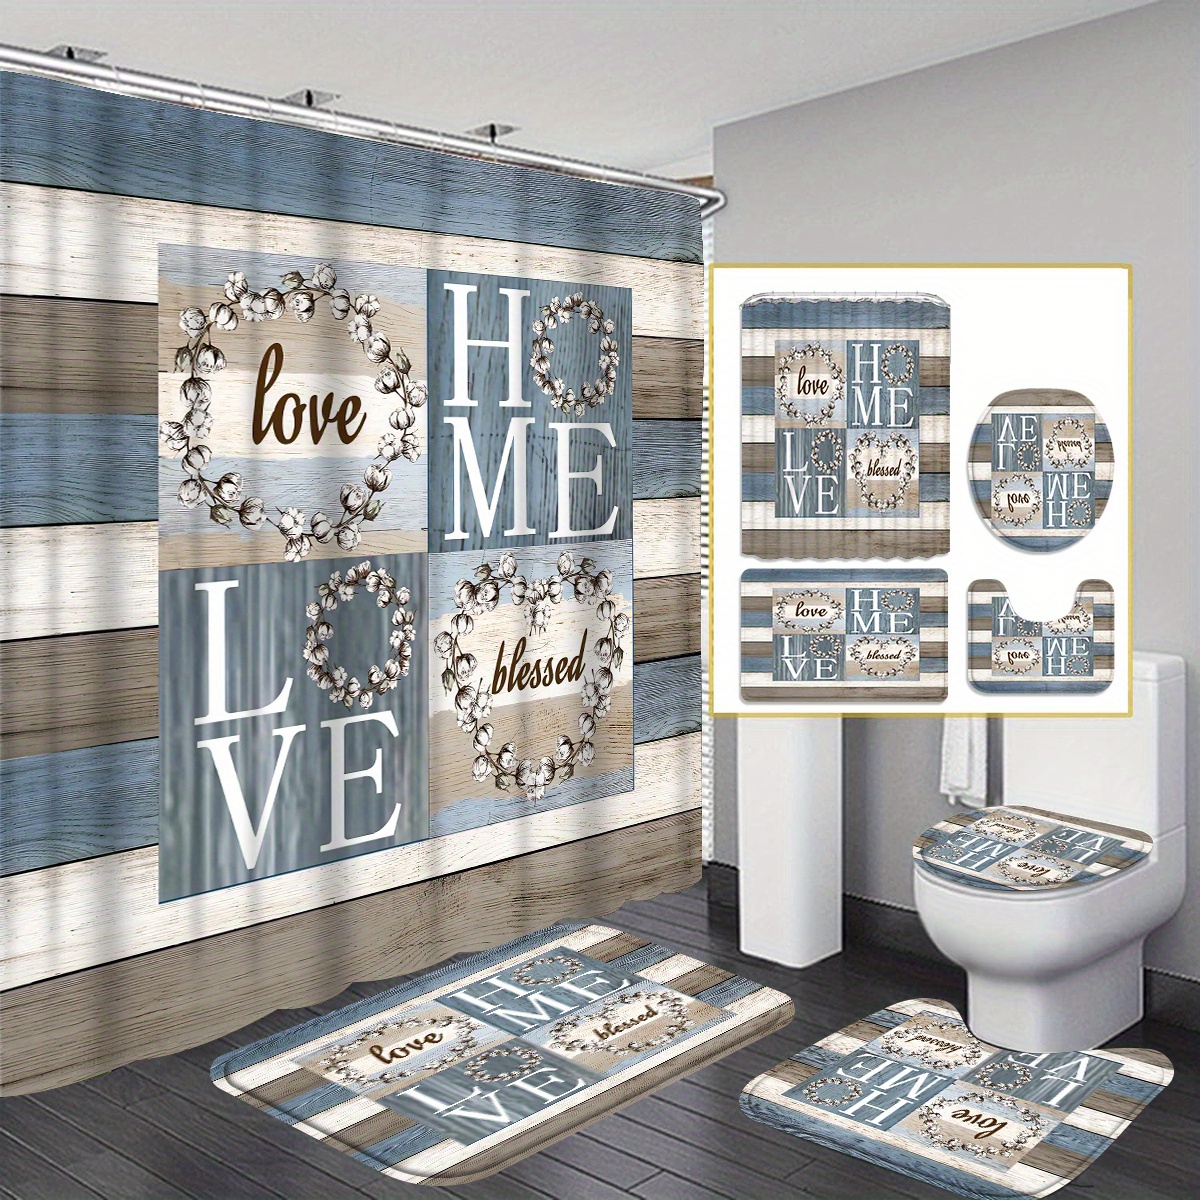 

4pcs Wood Grain Background Letters Shower Curtain Gift Modern Home Bathroom Decoration Curtain And Toilet Floor Mat 3-piece Set With 12 Shower Curtain Hooks